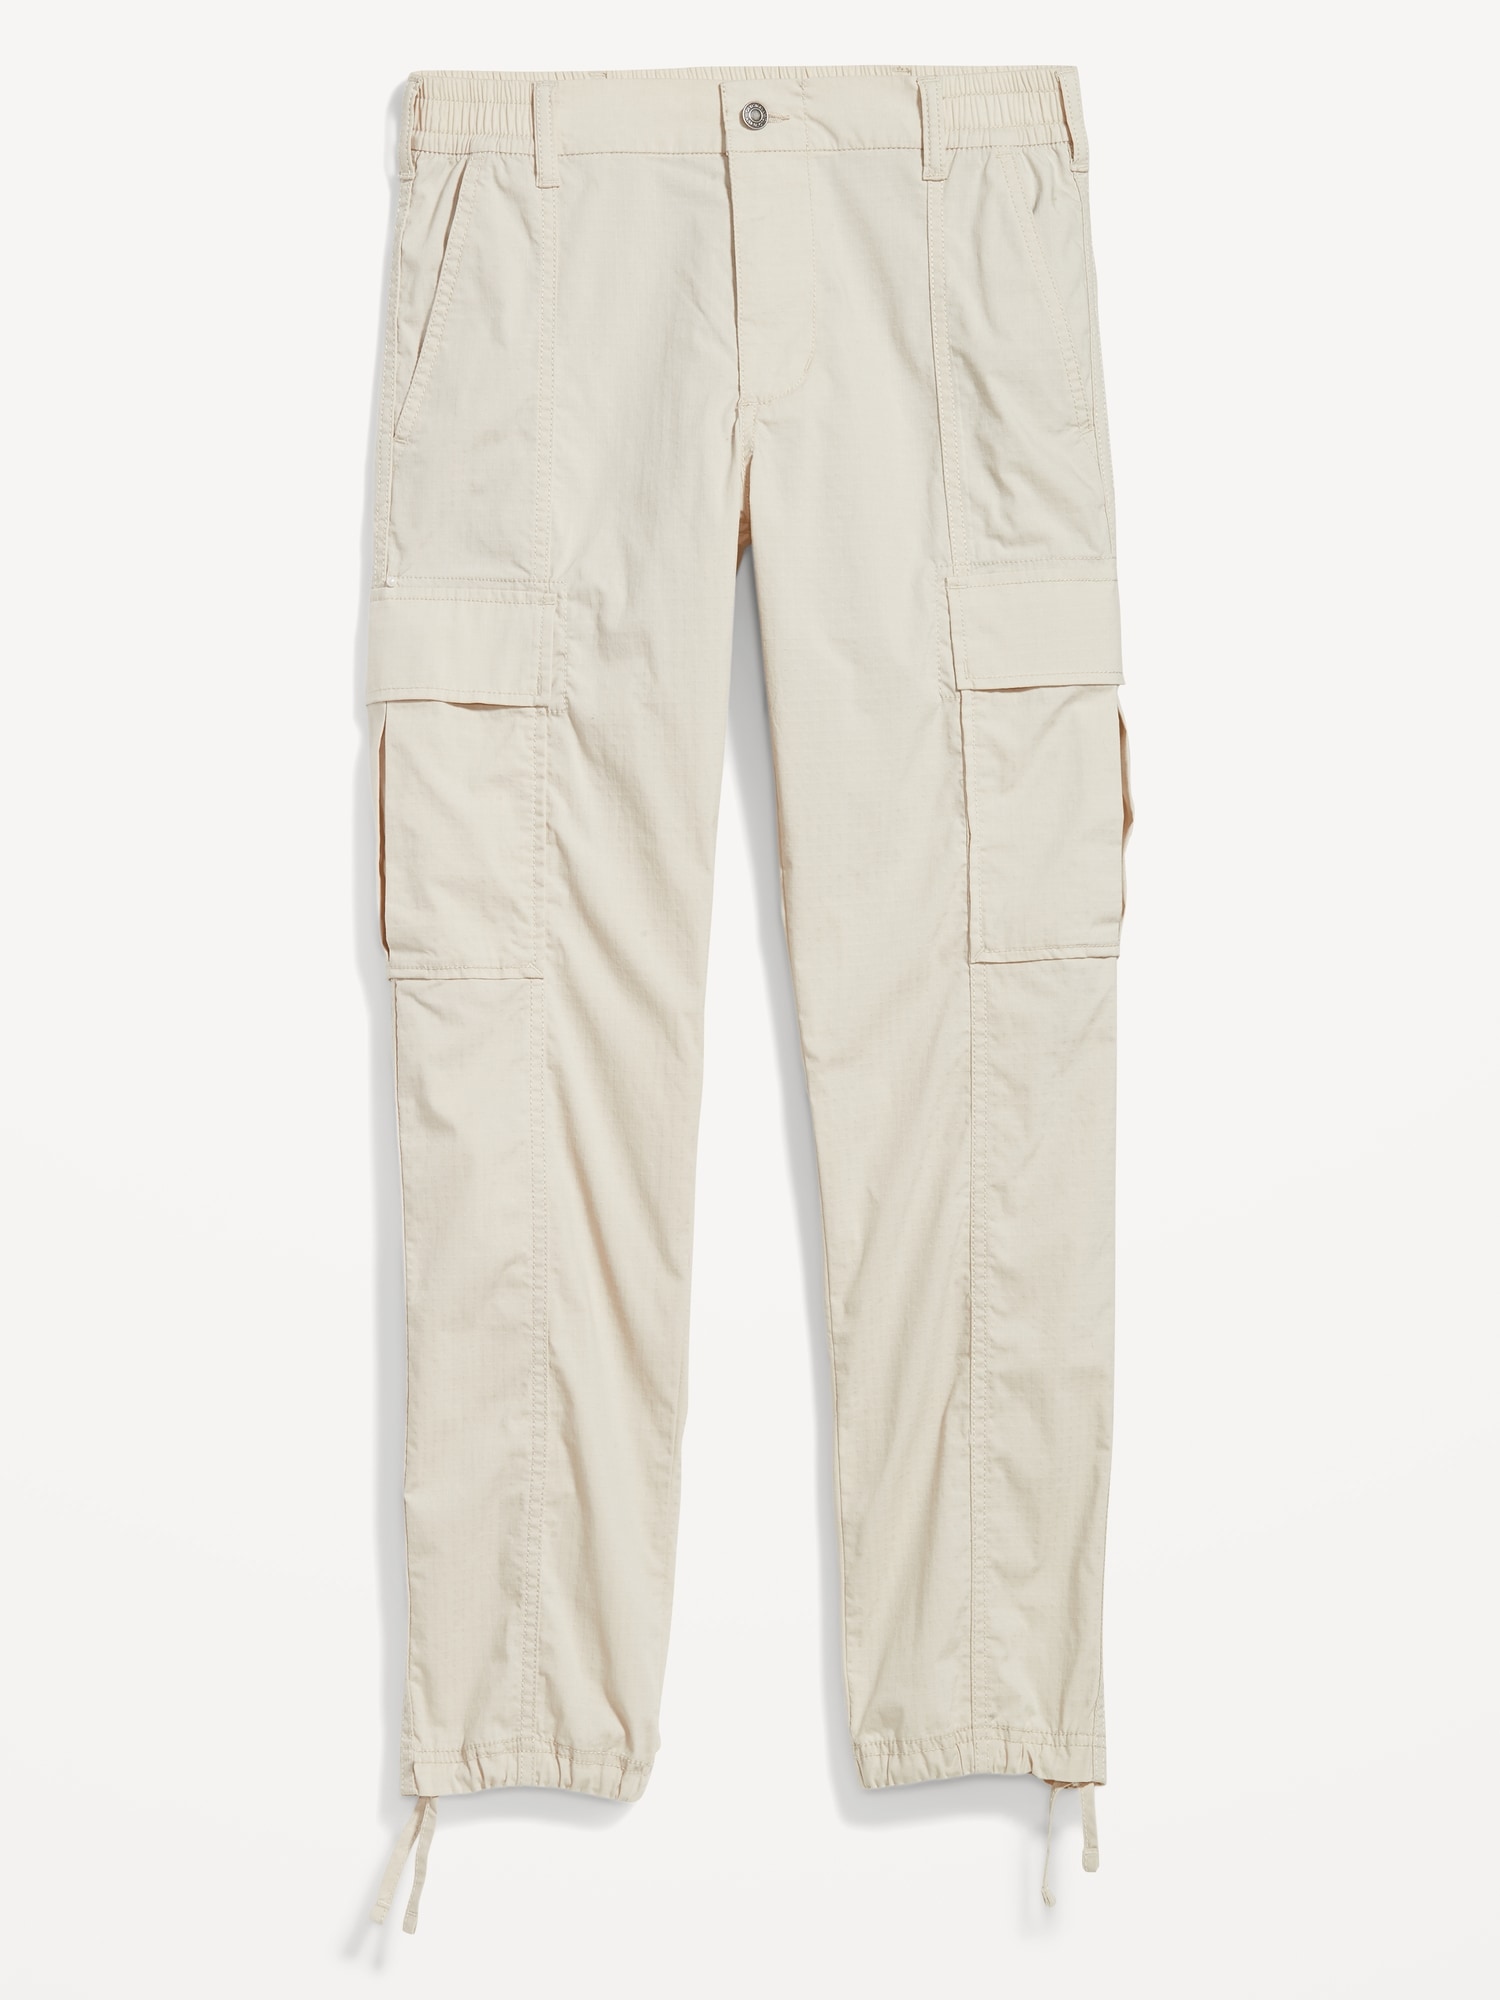 Old Navy Men's Straight Ripstop Cargo Pants - - Tall Size XL